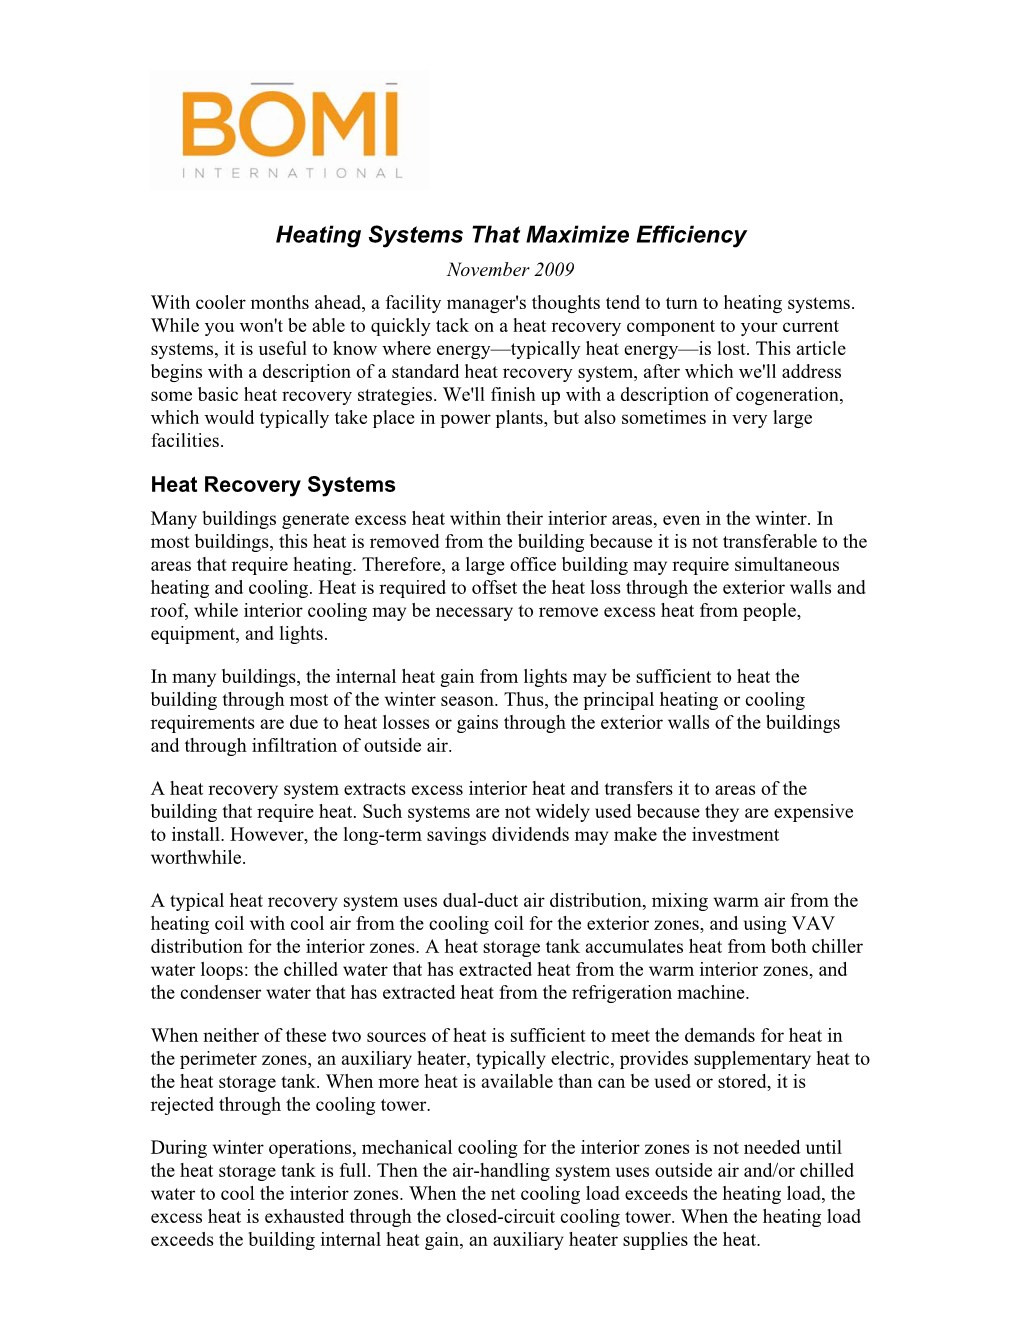 Heating Systems That Maximize Efficiency November 2009 with Cooler Months Ahead, a Facility Manager's Thoughts Tend to Turn to Heating Systems